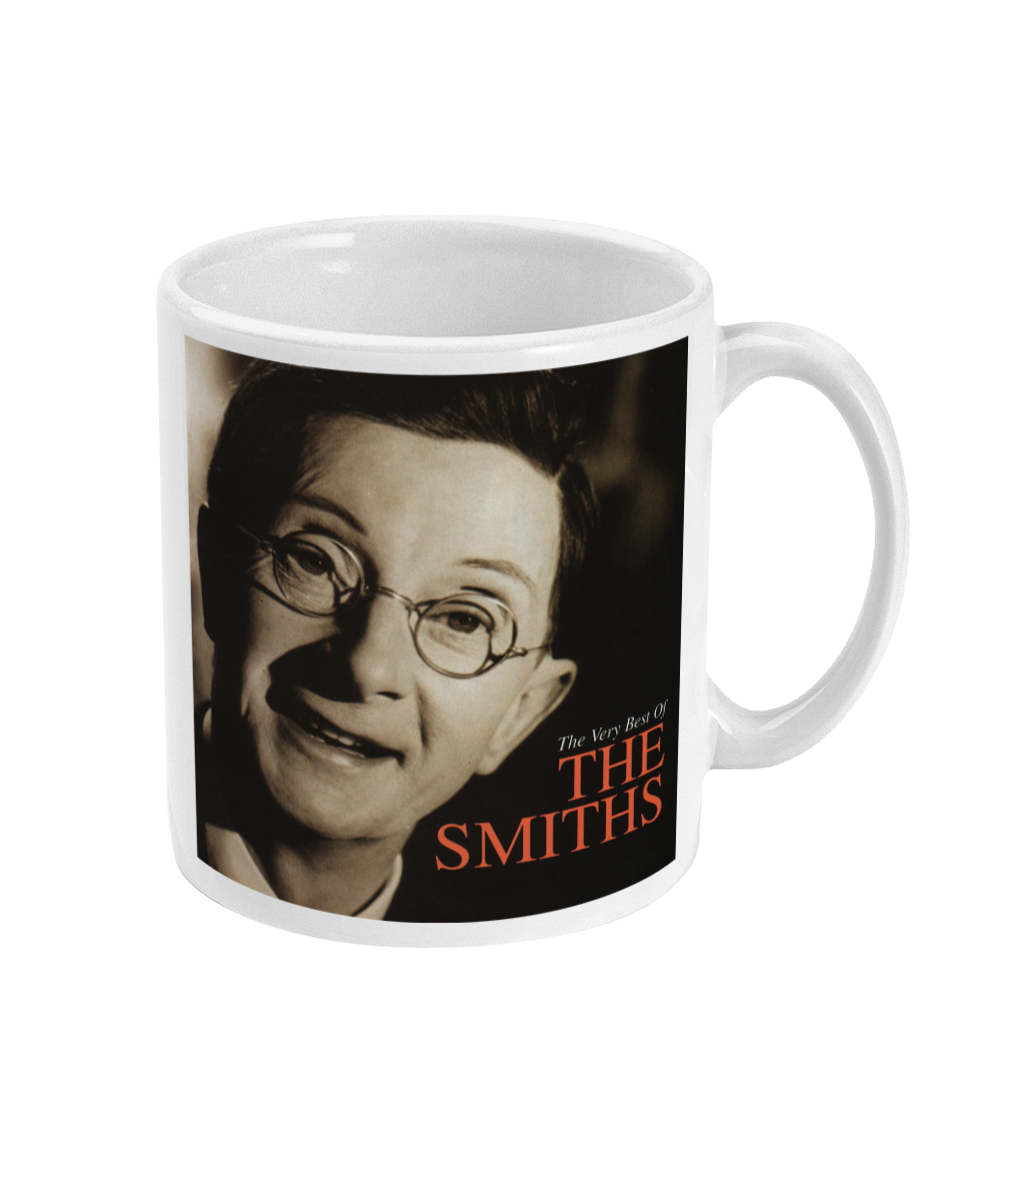 THE SMITHS - The Very Best Of - 2001 - Mug